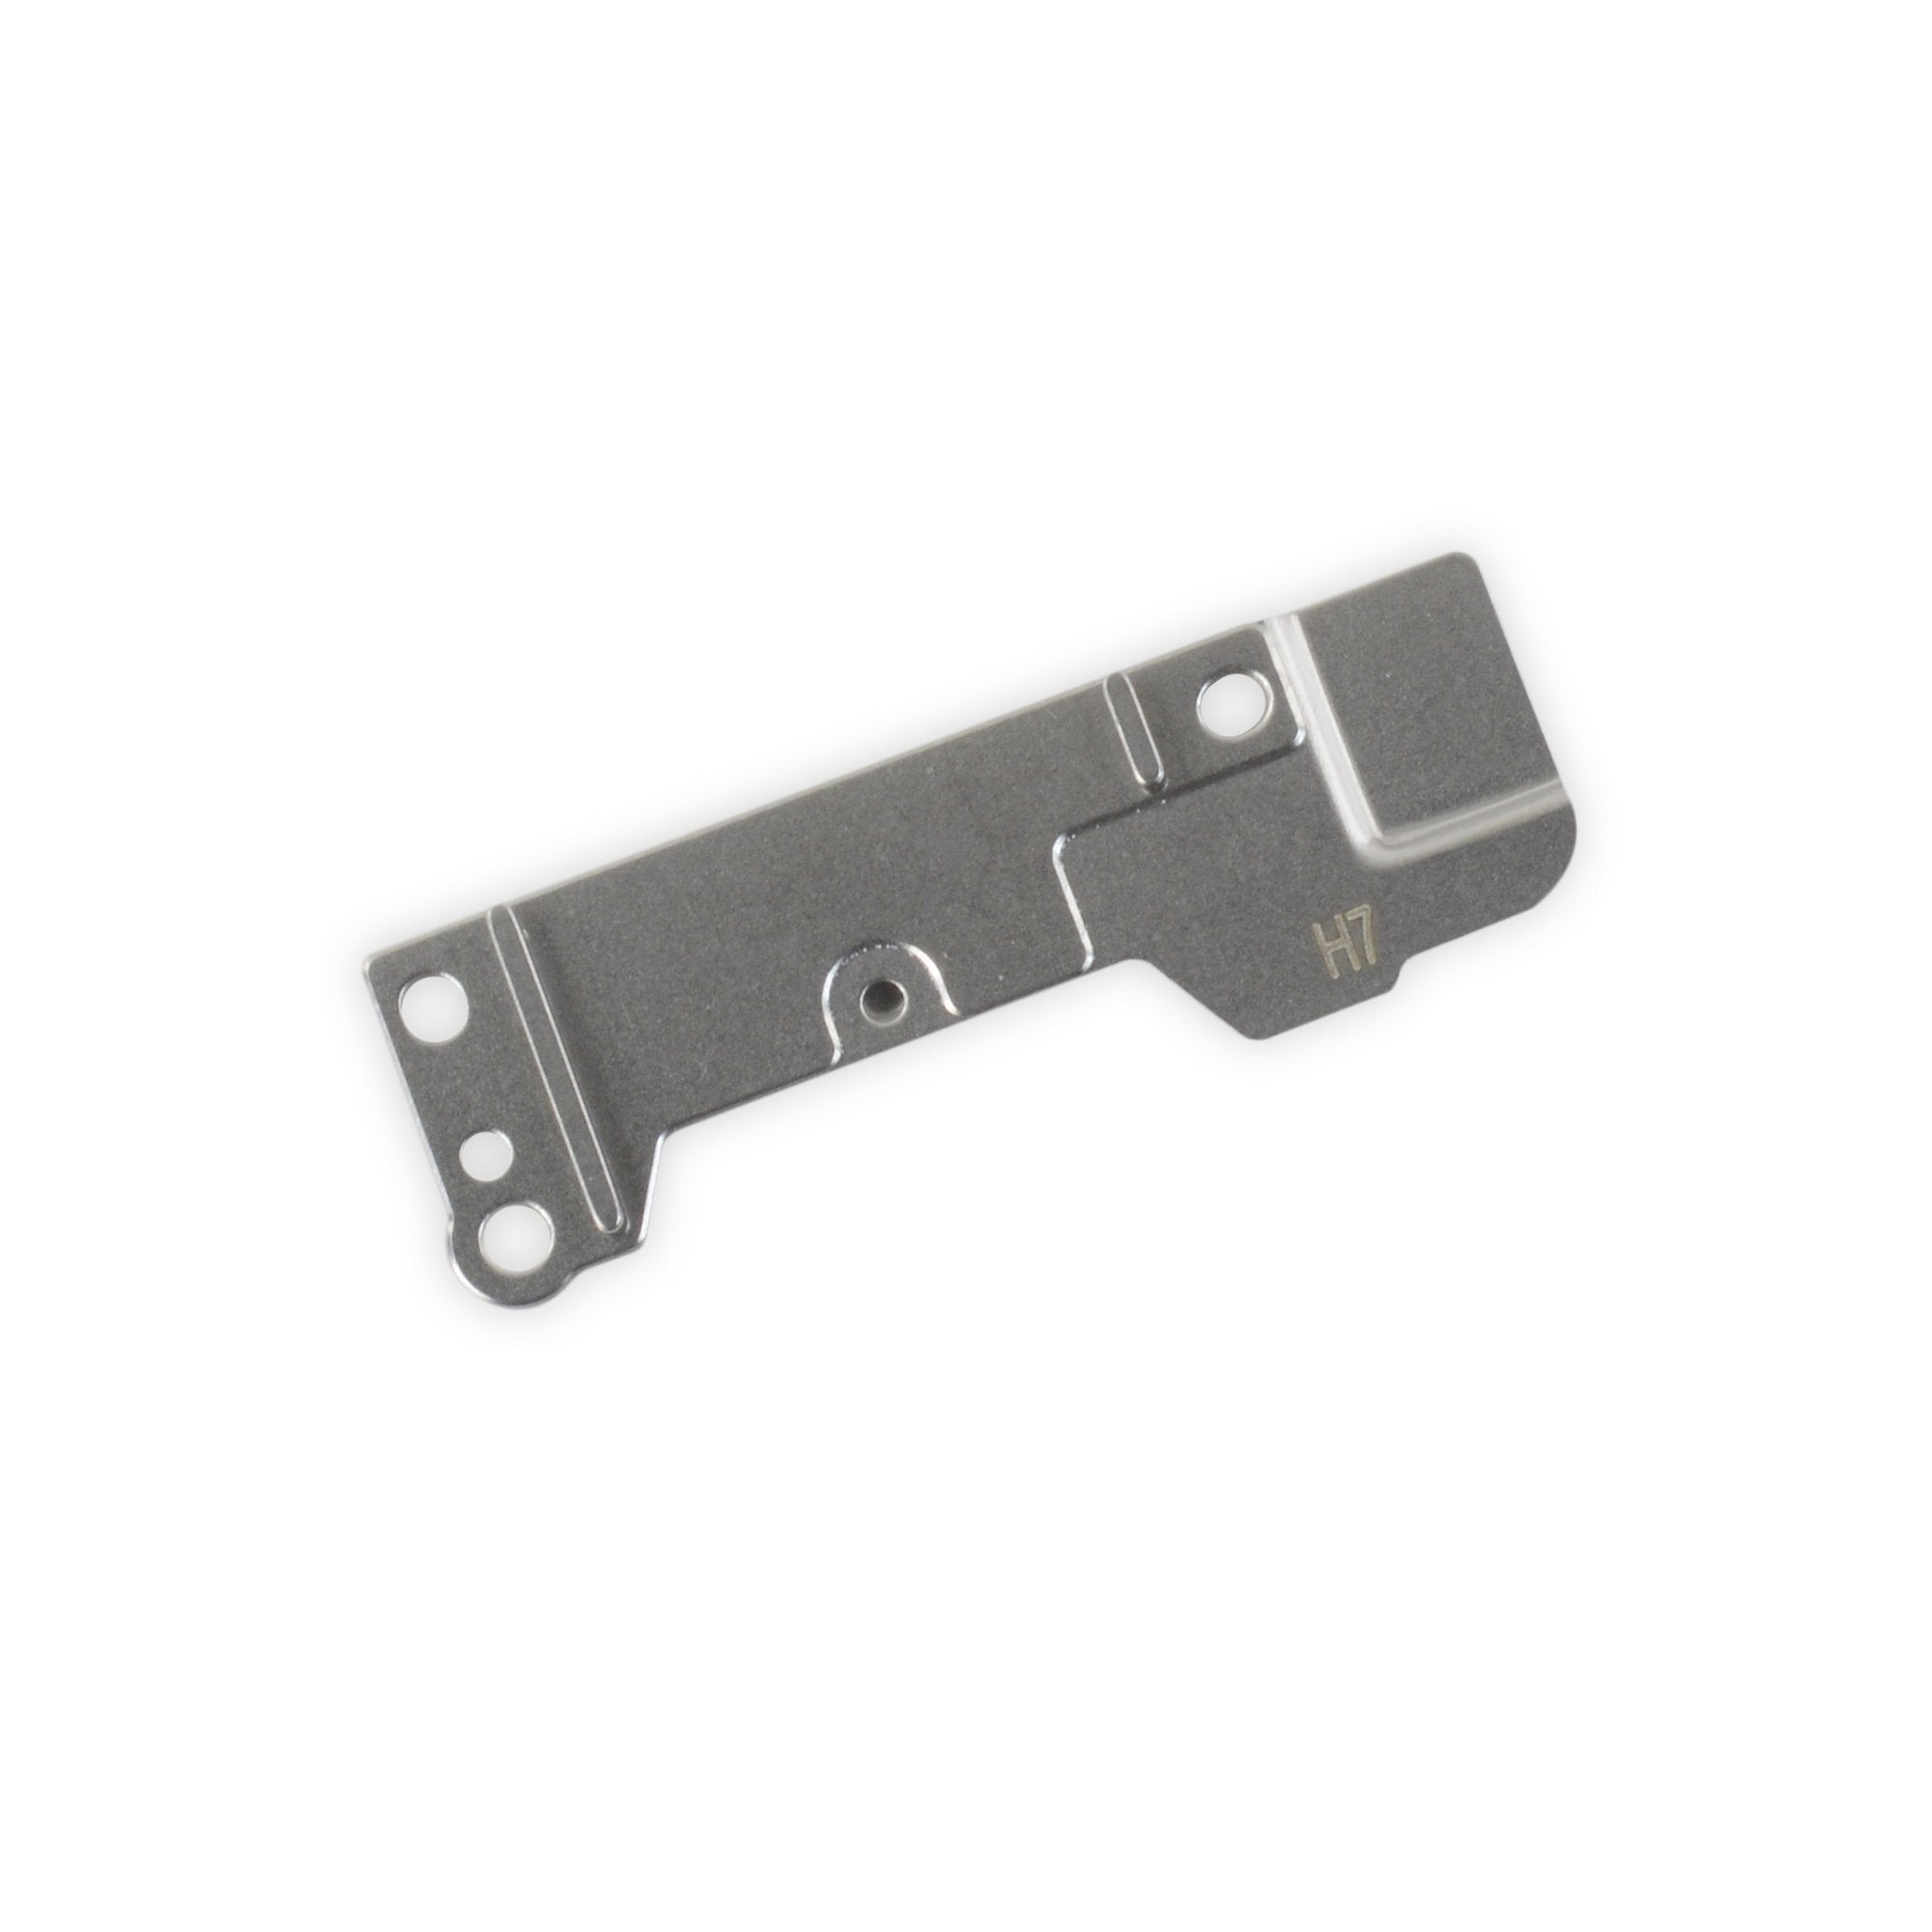 iPhone 6s Home Button Bracket